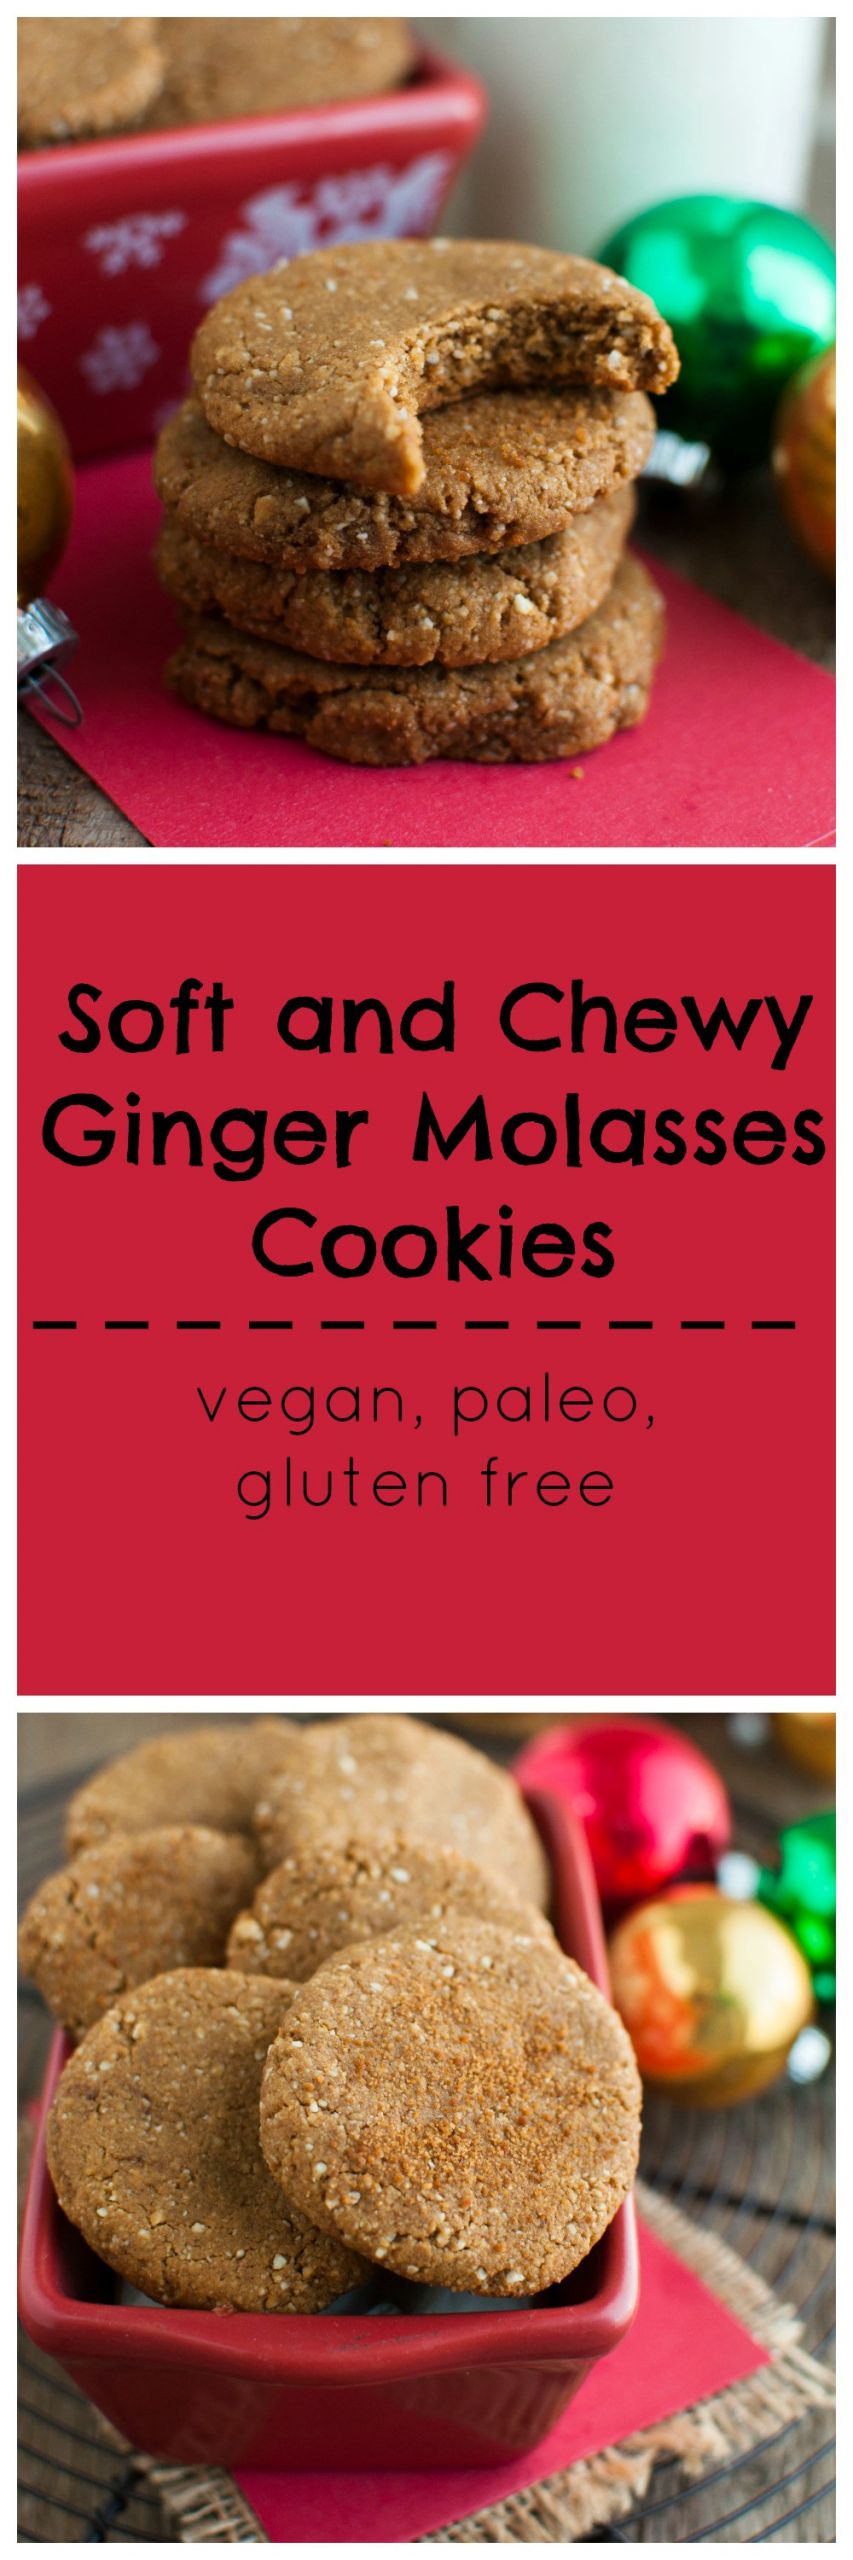 Vegan Ginger Molasses Cookies
 Soft and Chewy Ginger Molasses Cookies A Twist on the